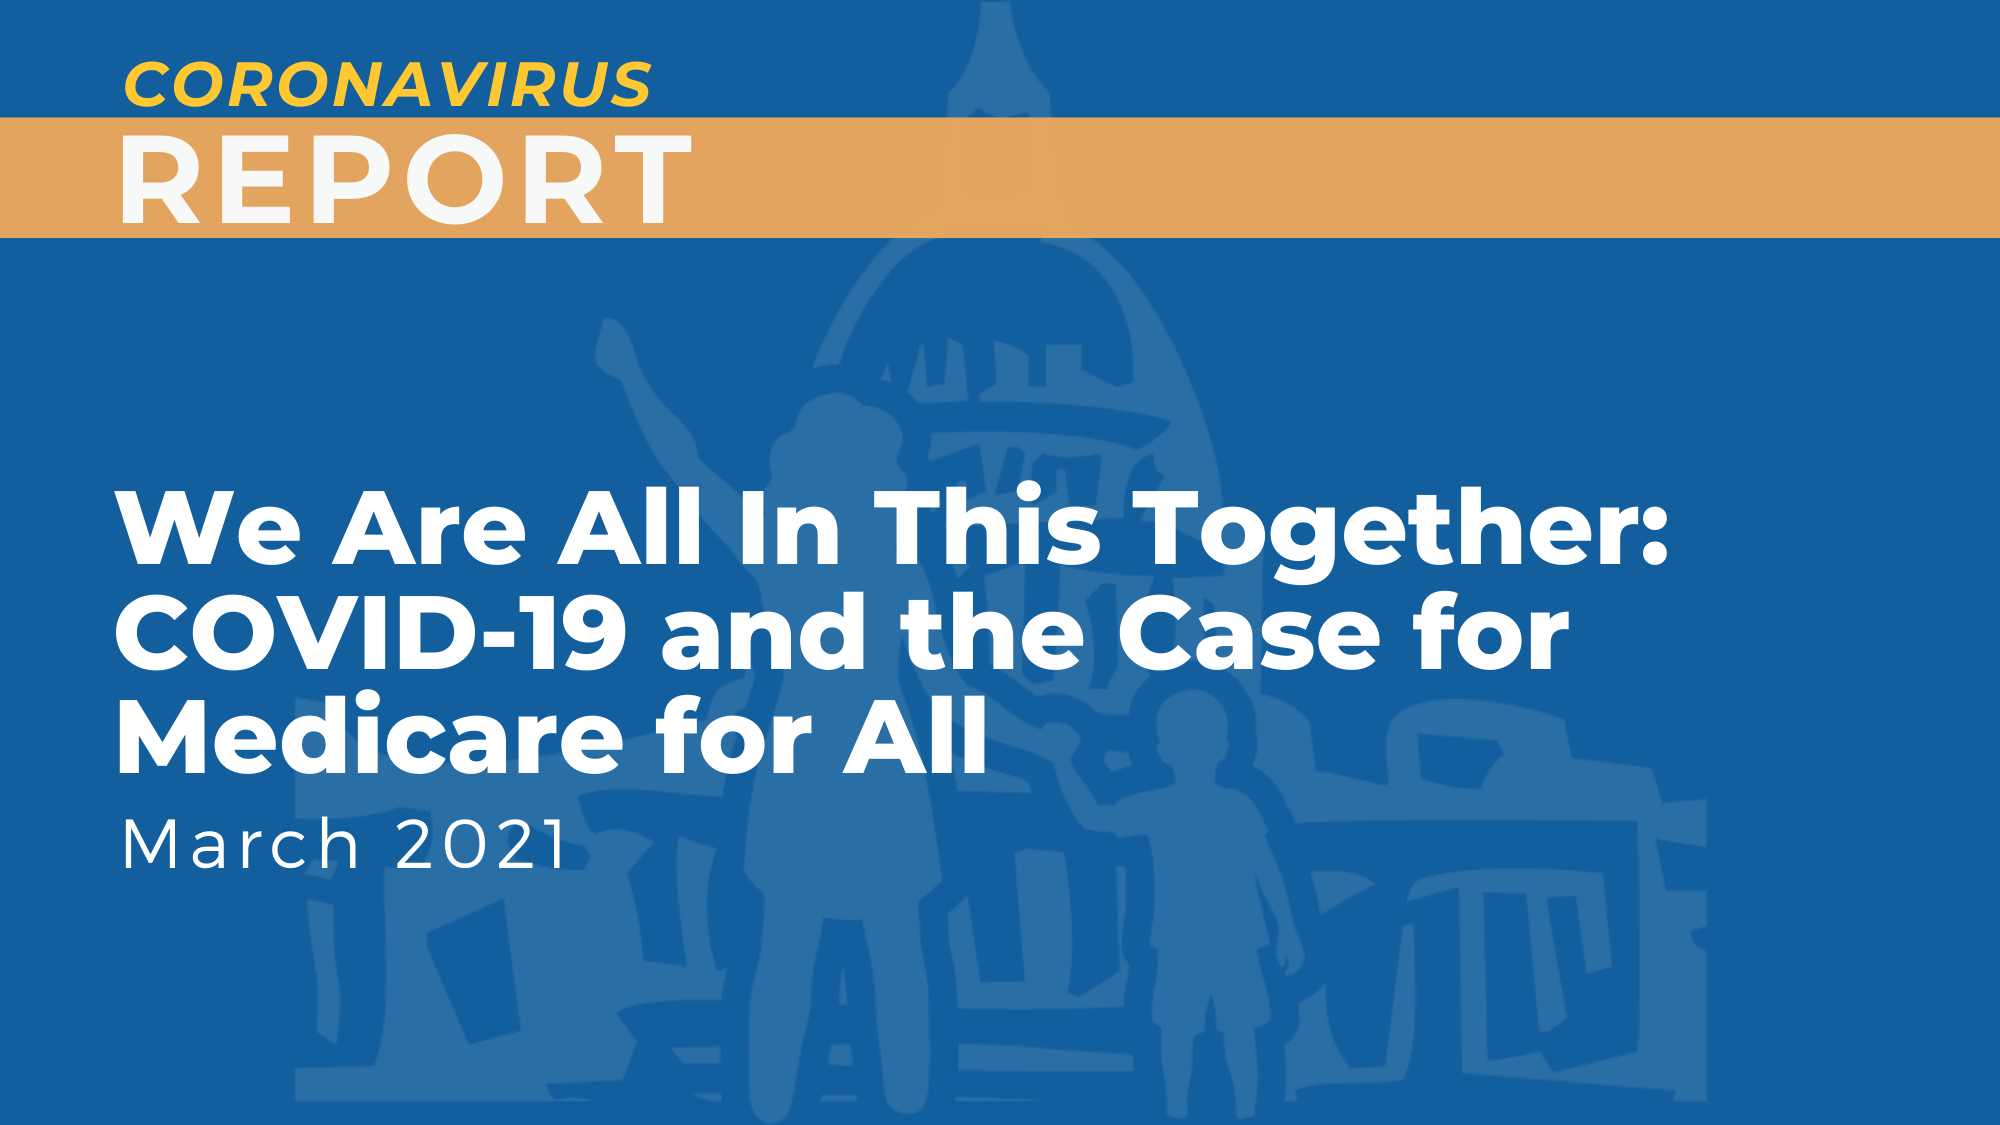 We Are All In This Together: COVID-19 and the Case for Medicare for All